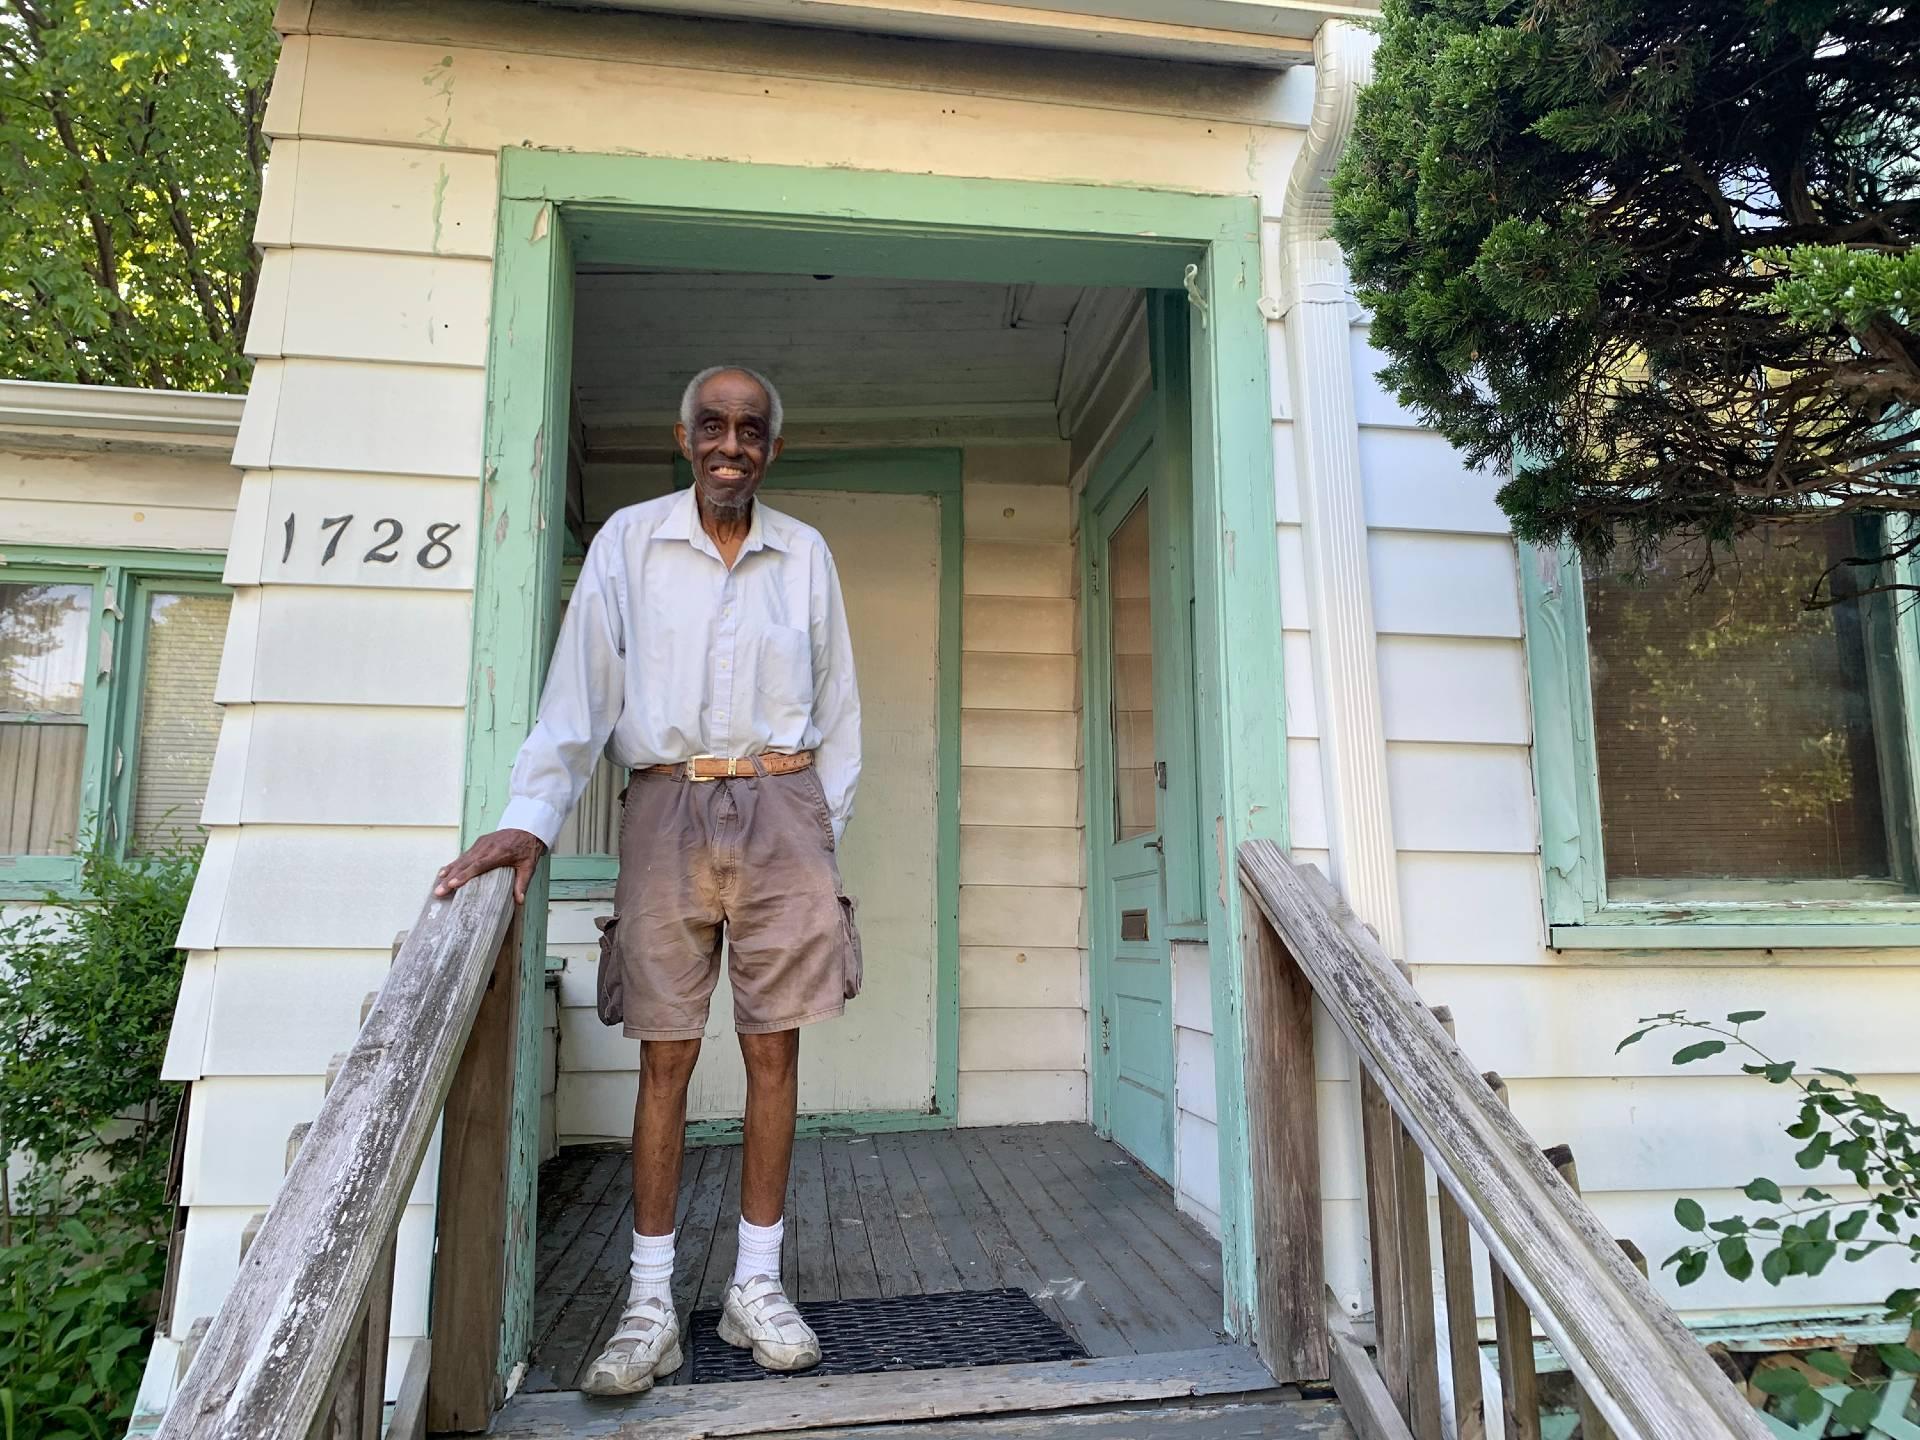 Louis Weathers says racial discrimination in Evanston, Illinois, made house hunting difficult for him decades ago. (Jacquelyne Germain / CNN)